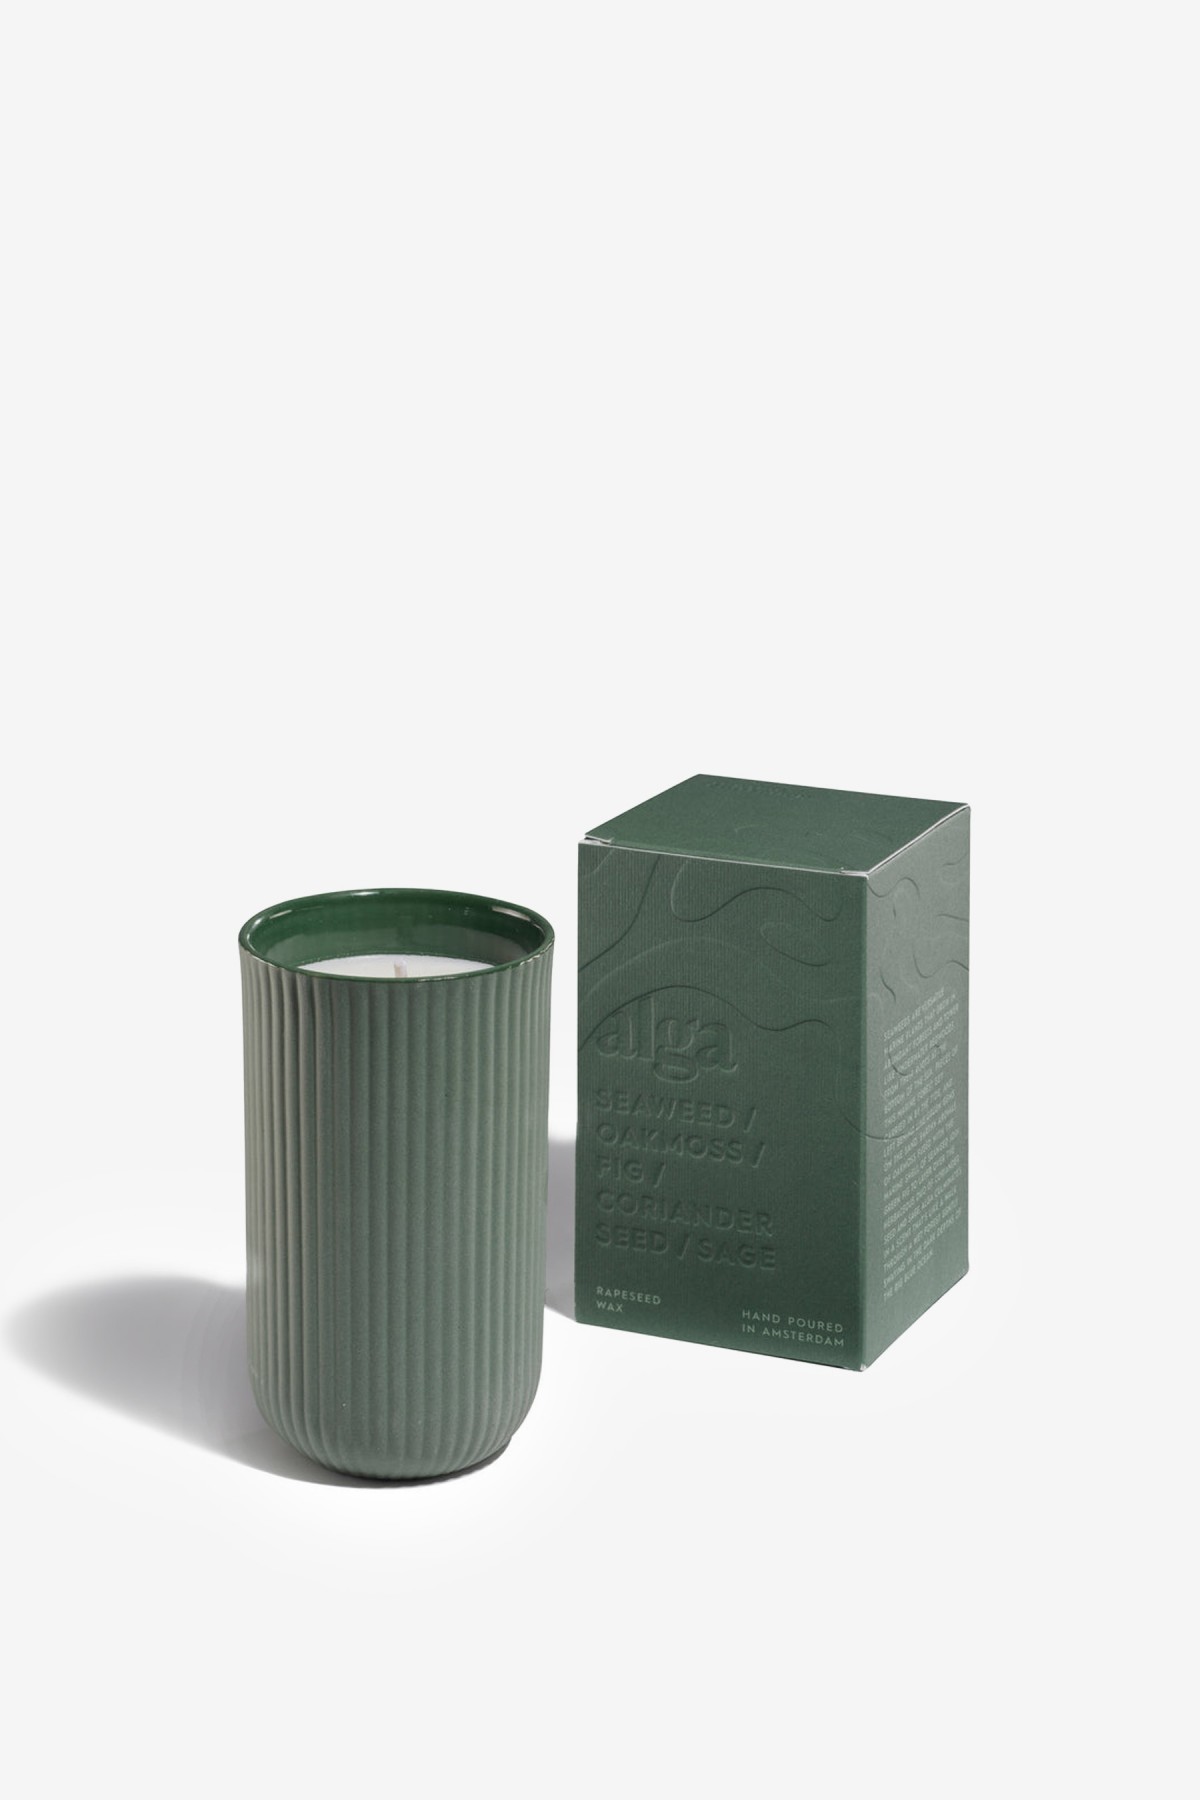 Very Goods Studio Lowtide Collection 250ml Candle in Alga